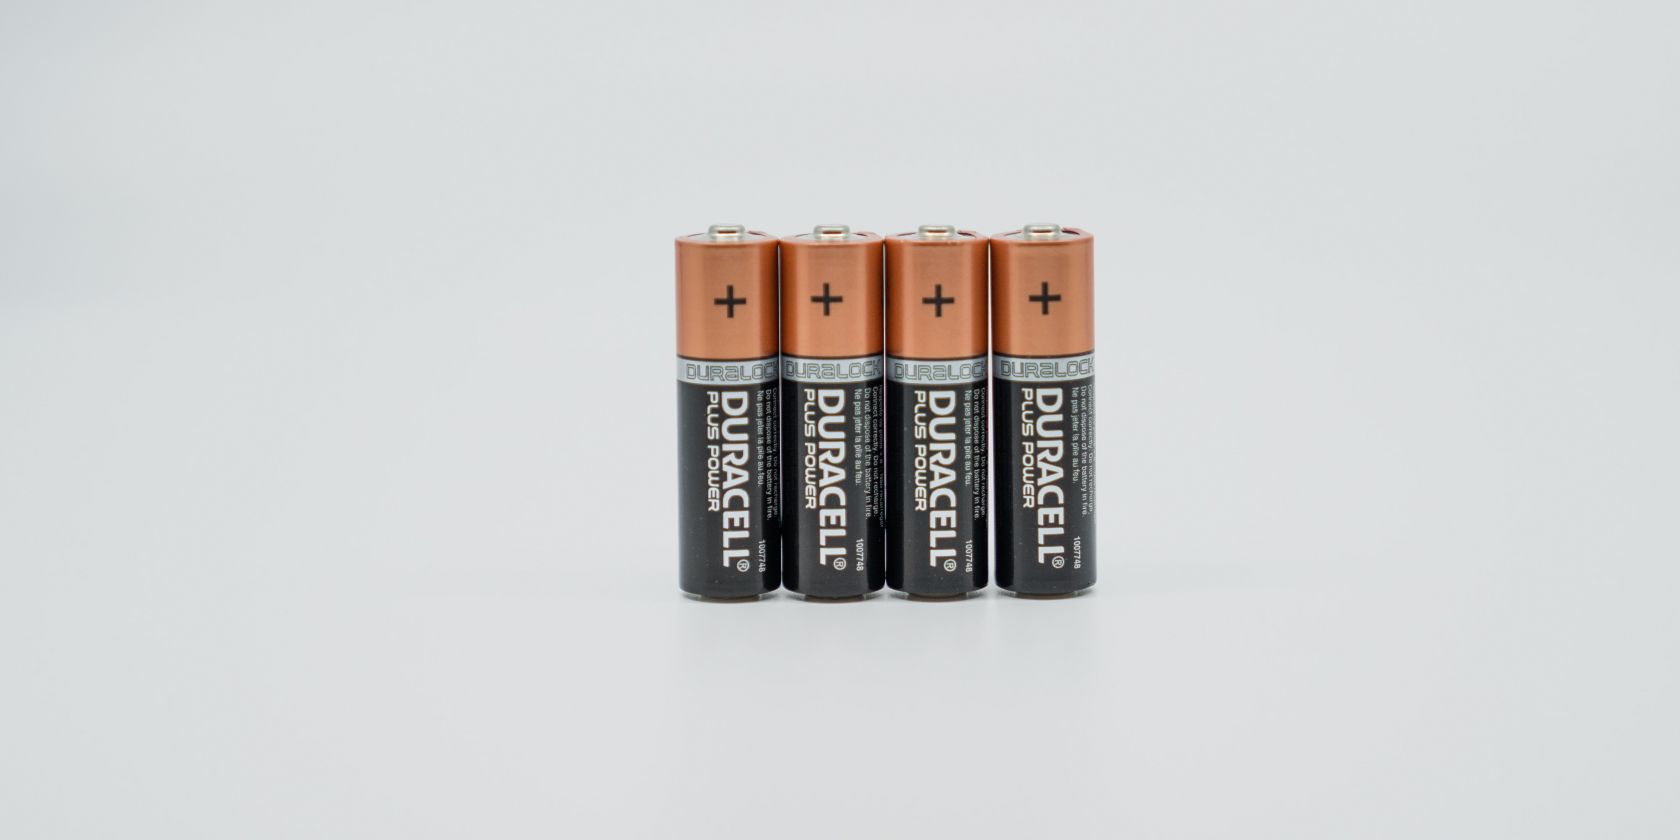 Photo of duracell batteries lined up against each other